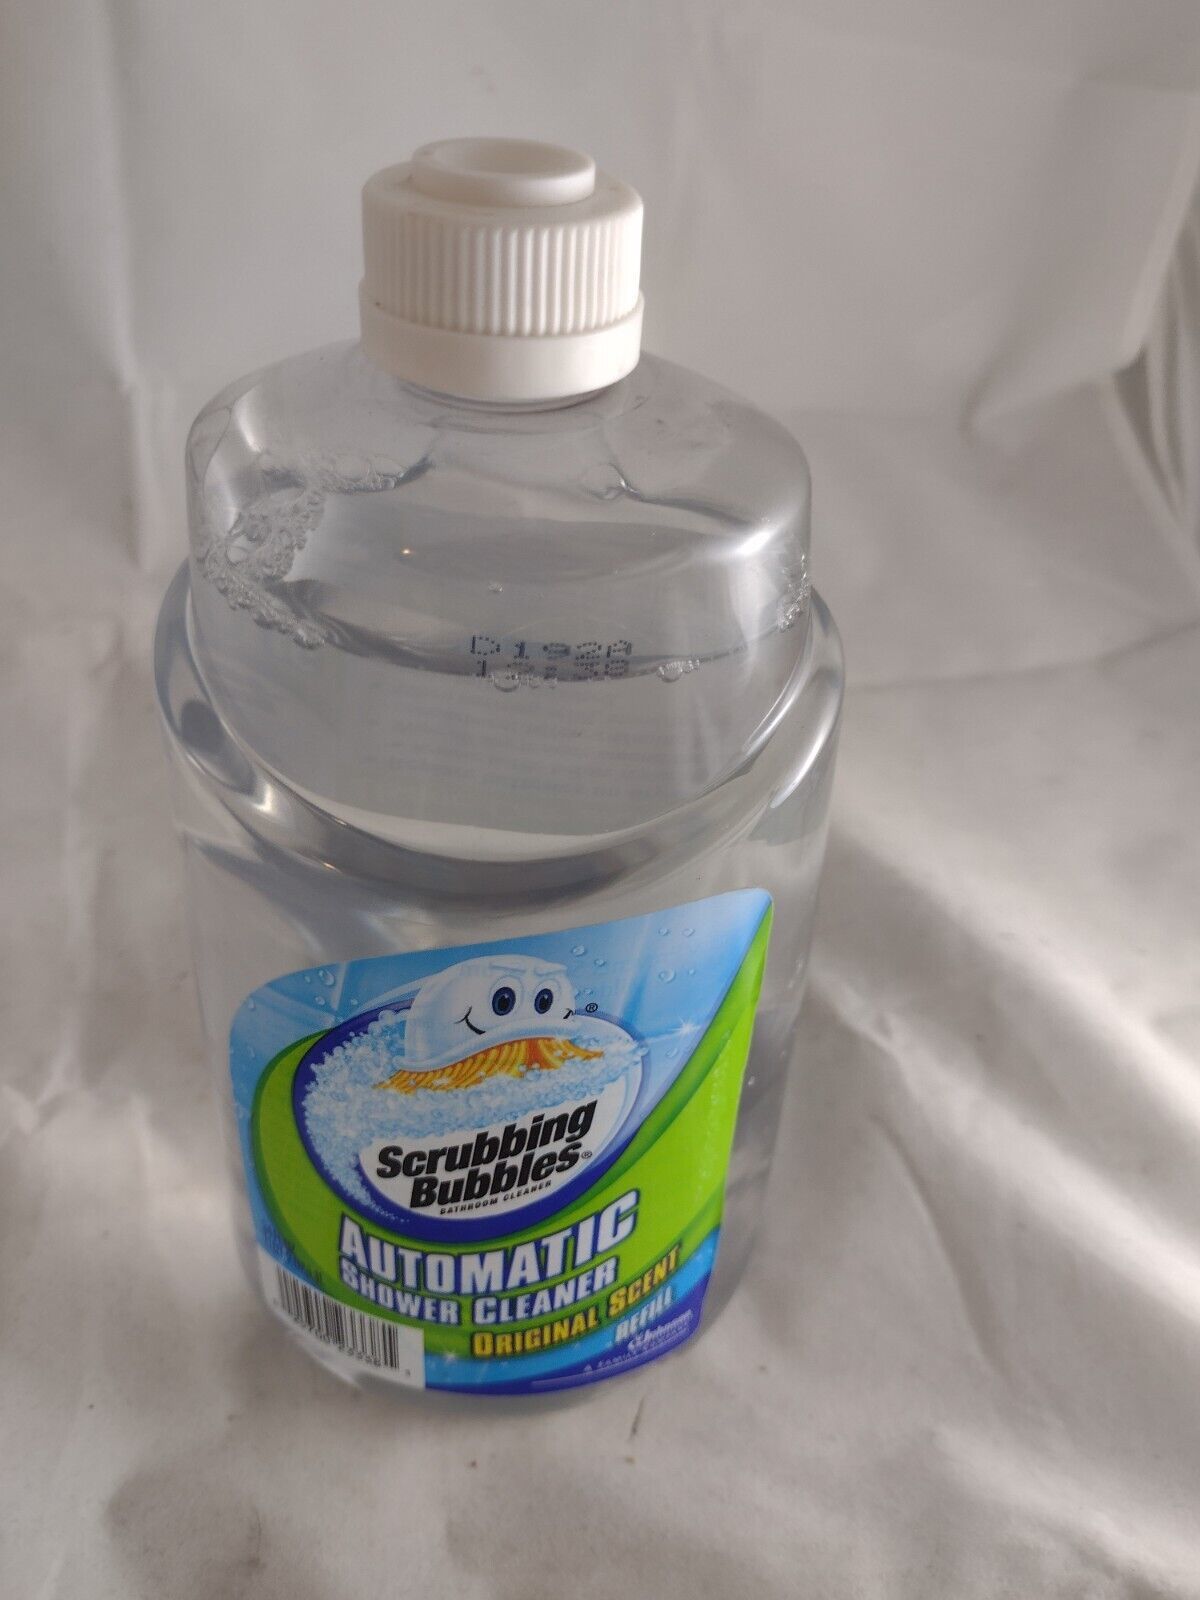 Primary image for SCRUBBING BUBBLES AUTOMATIC SHOWER CLEANER REFILL ORIGINAL